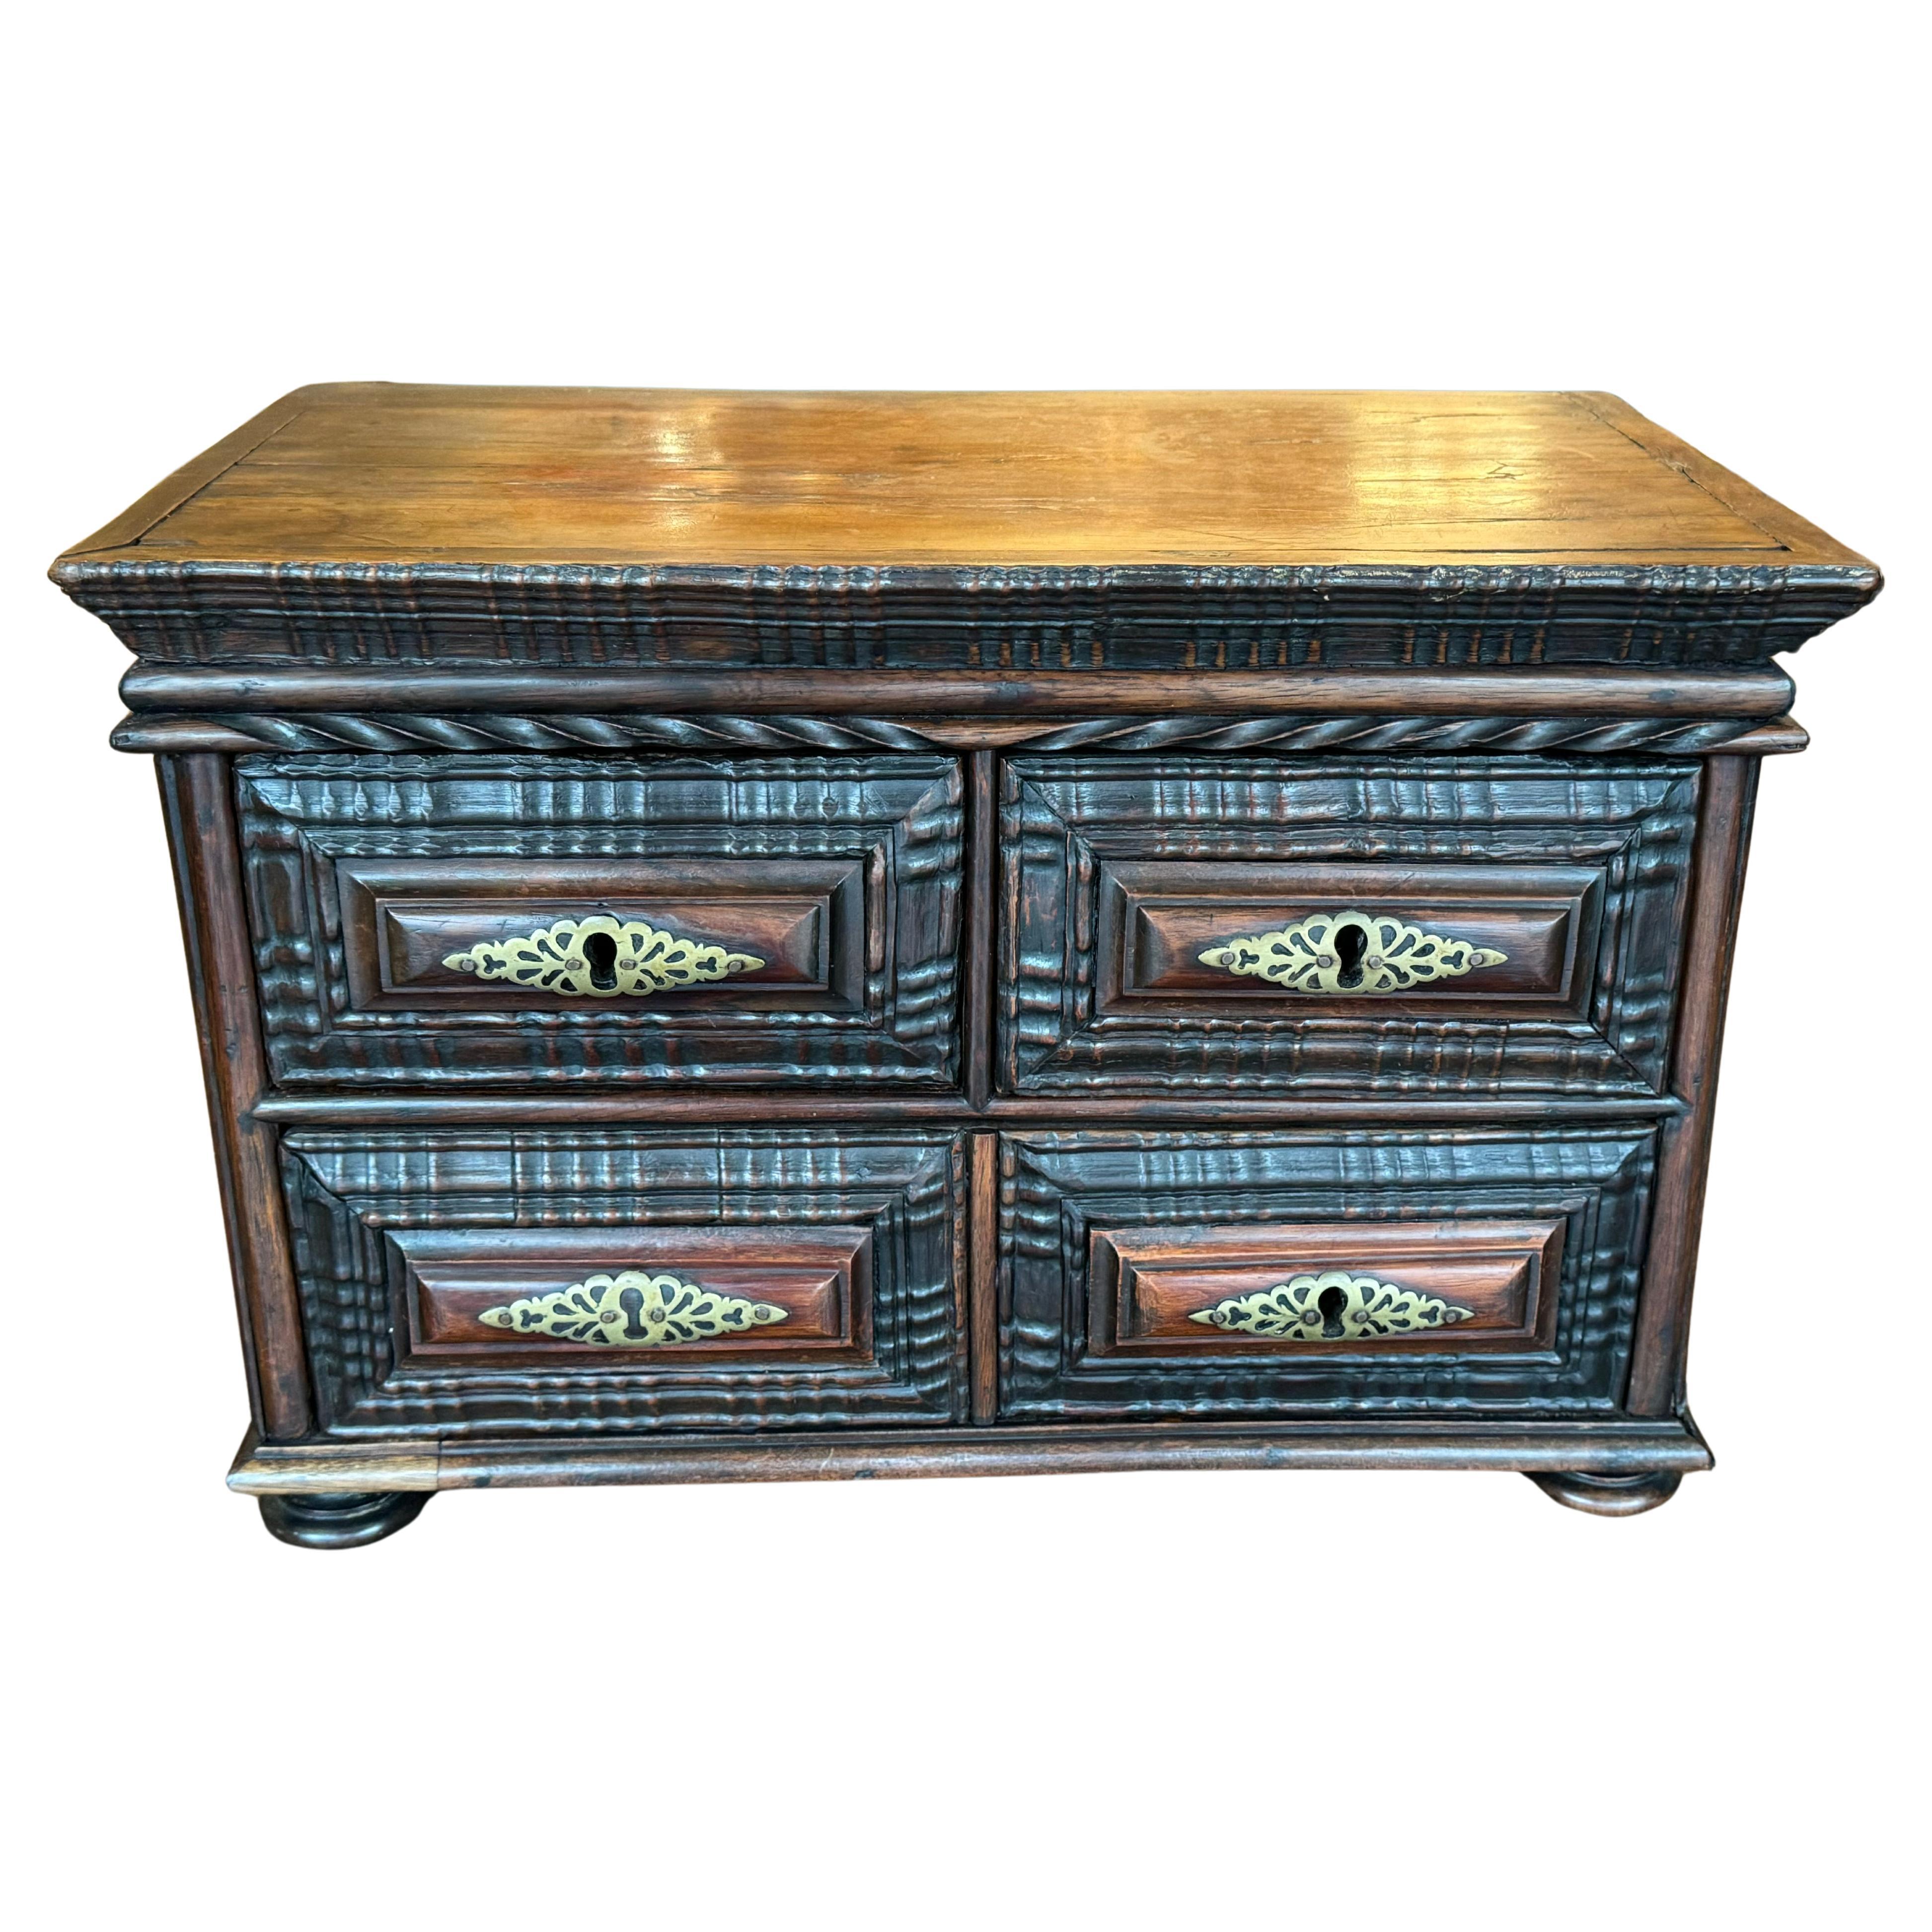 Portuguese Rosewood Baroque Chest, Circa 1830
Suited for Jewelry, Occasional Storage, or Decorative Use
Sourced by Martyn Lawrence Bullard from Lisbon, Portugal